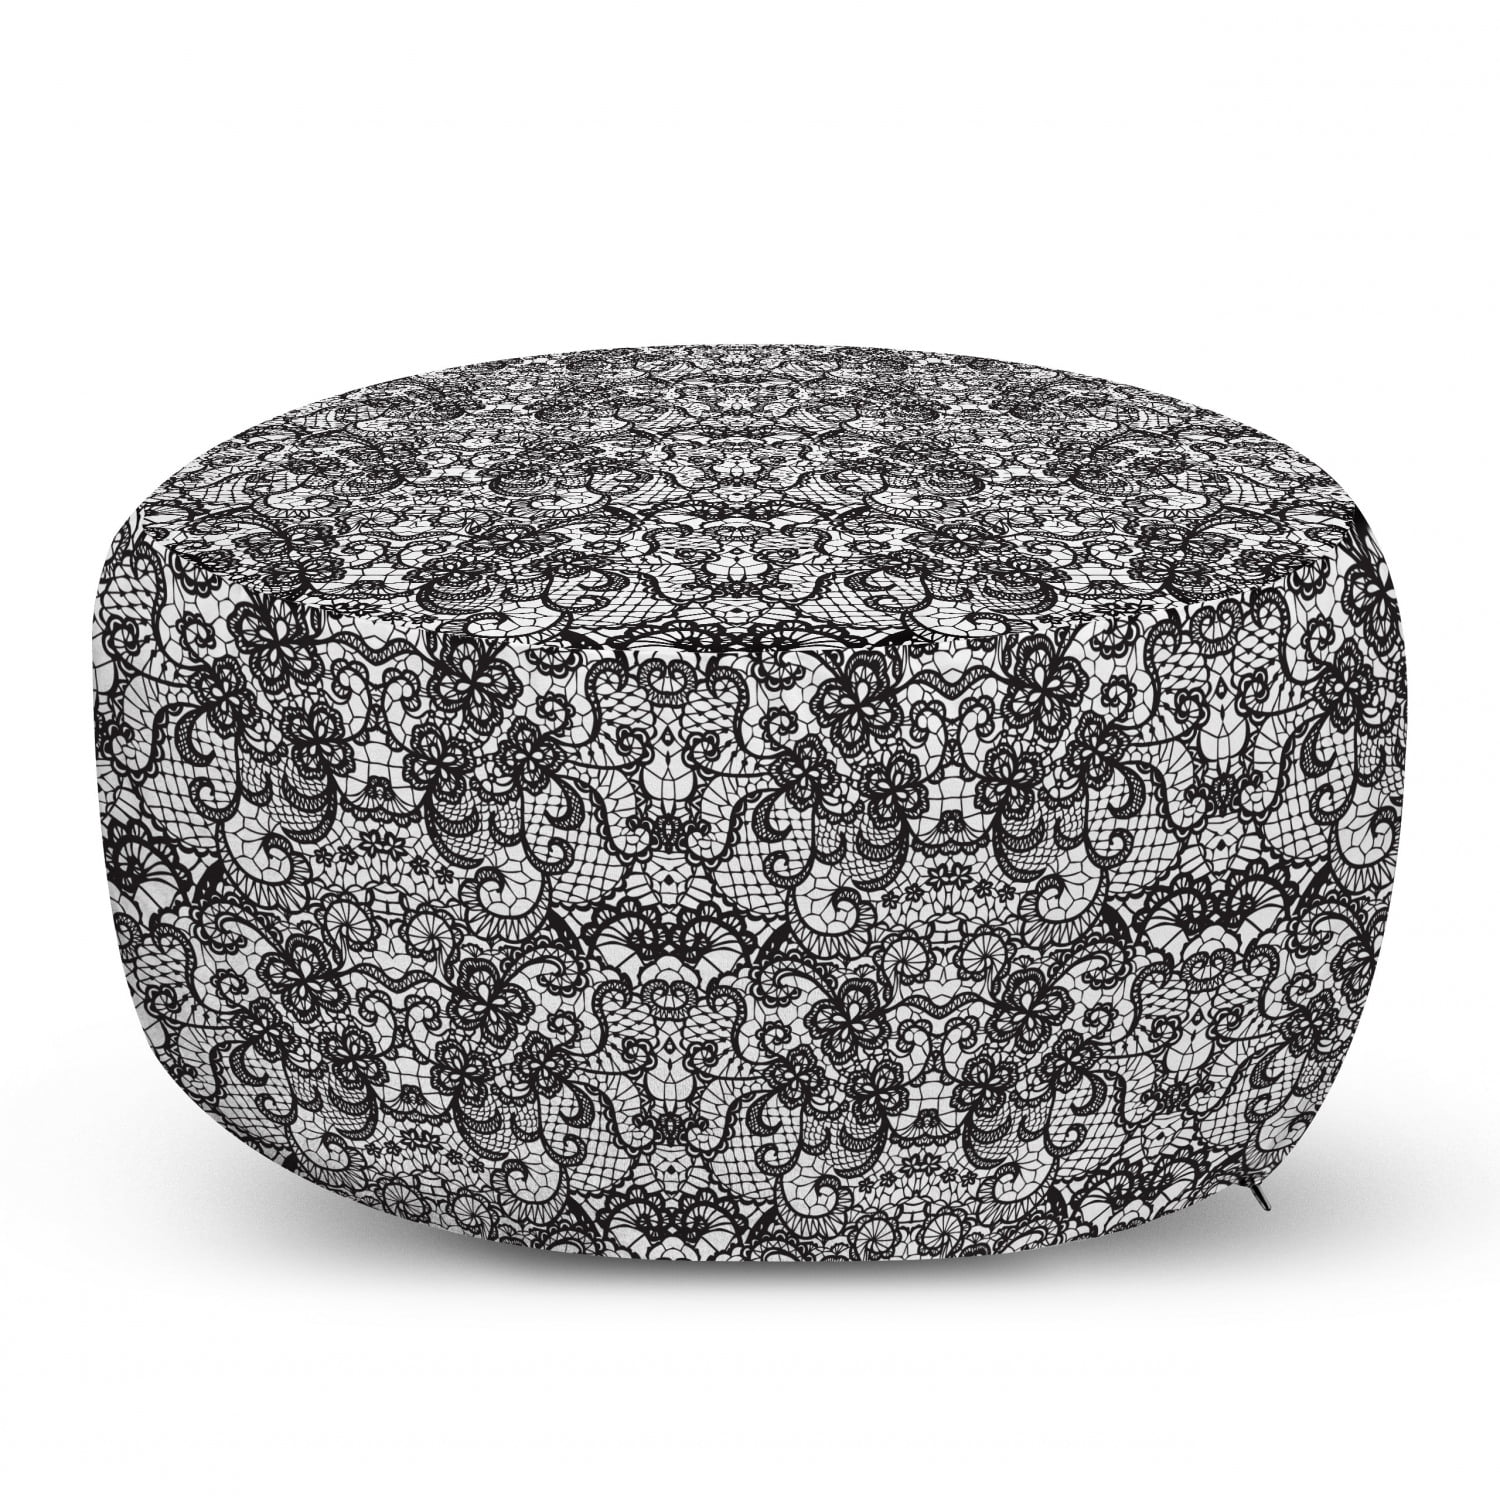 Decorative Soft Foot Rest with Removable Cover Living Room and Bedroom Ambesonne Gothic Ottoman Pouf Black White Classical Bridal Composition Vintage Spring Motifs Victorian Wedding Inspirations